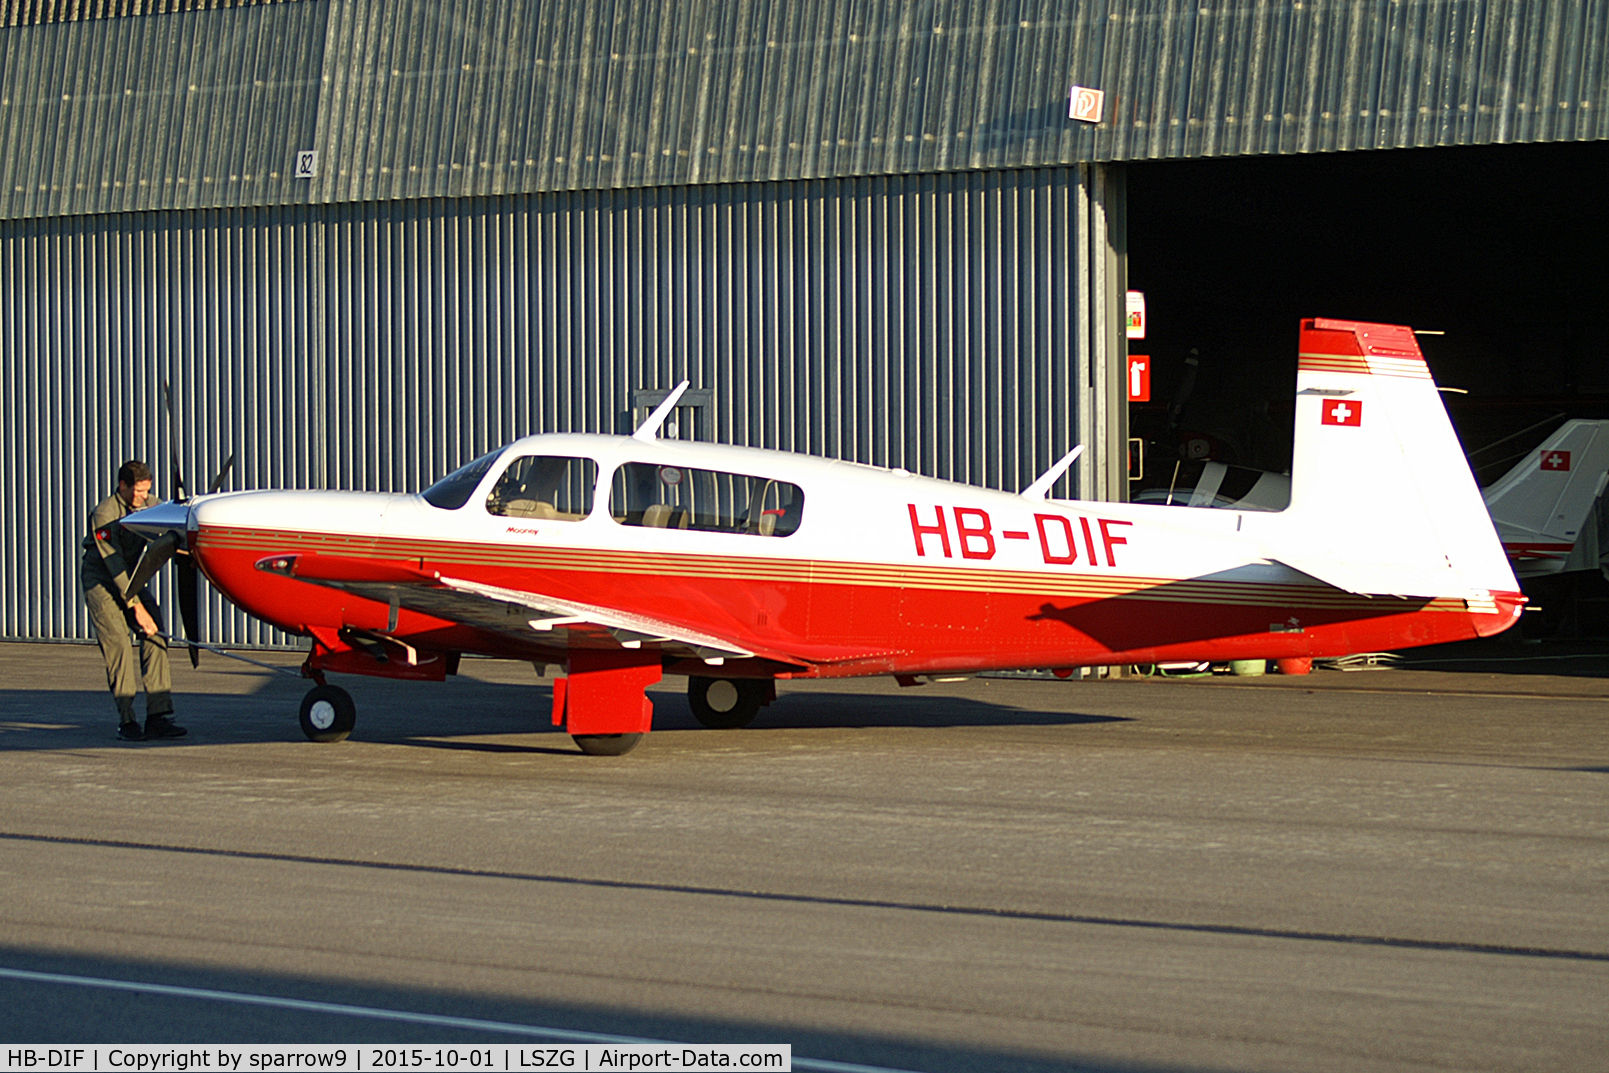 HB-DIF, 1995 Mooney M20M Bravo C/N 27-0206, some aircraft have to be moved to get to the own one in the back oft the hangar